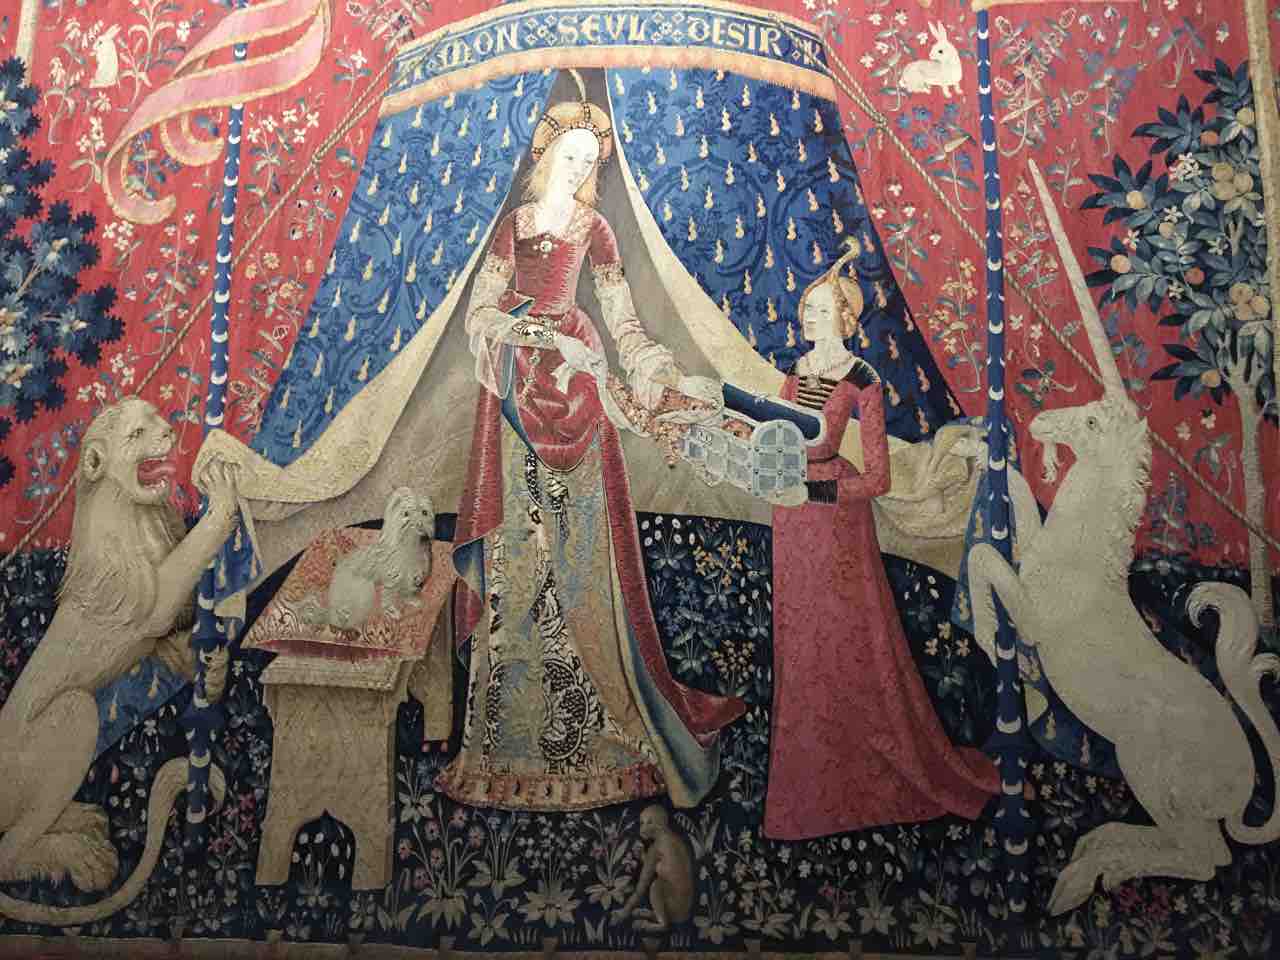 guided tour of the lady with the unicorn at the musée de cluny